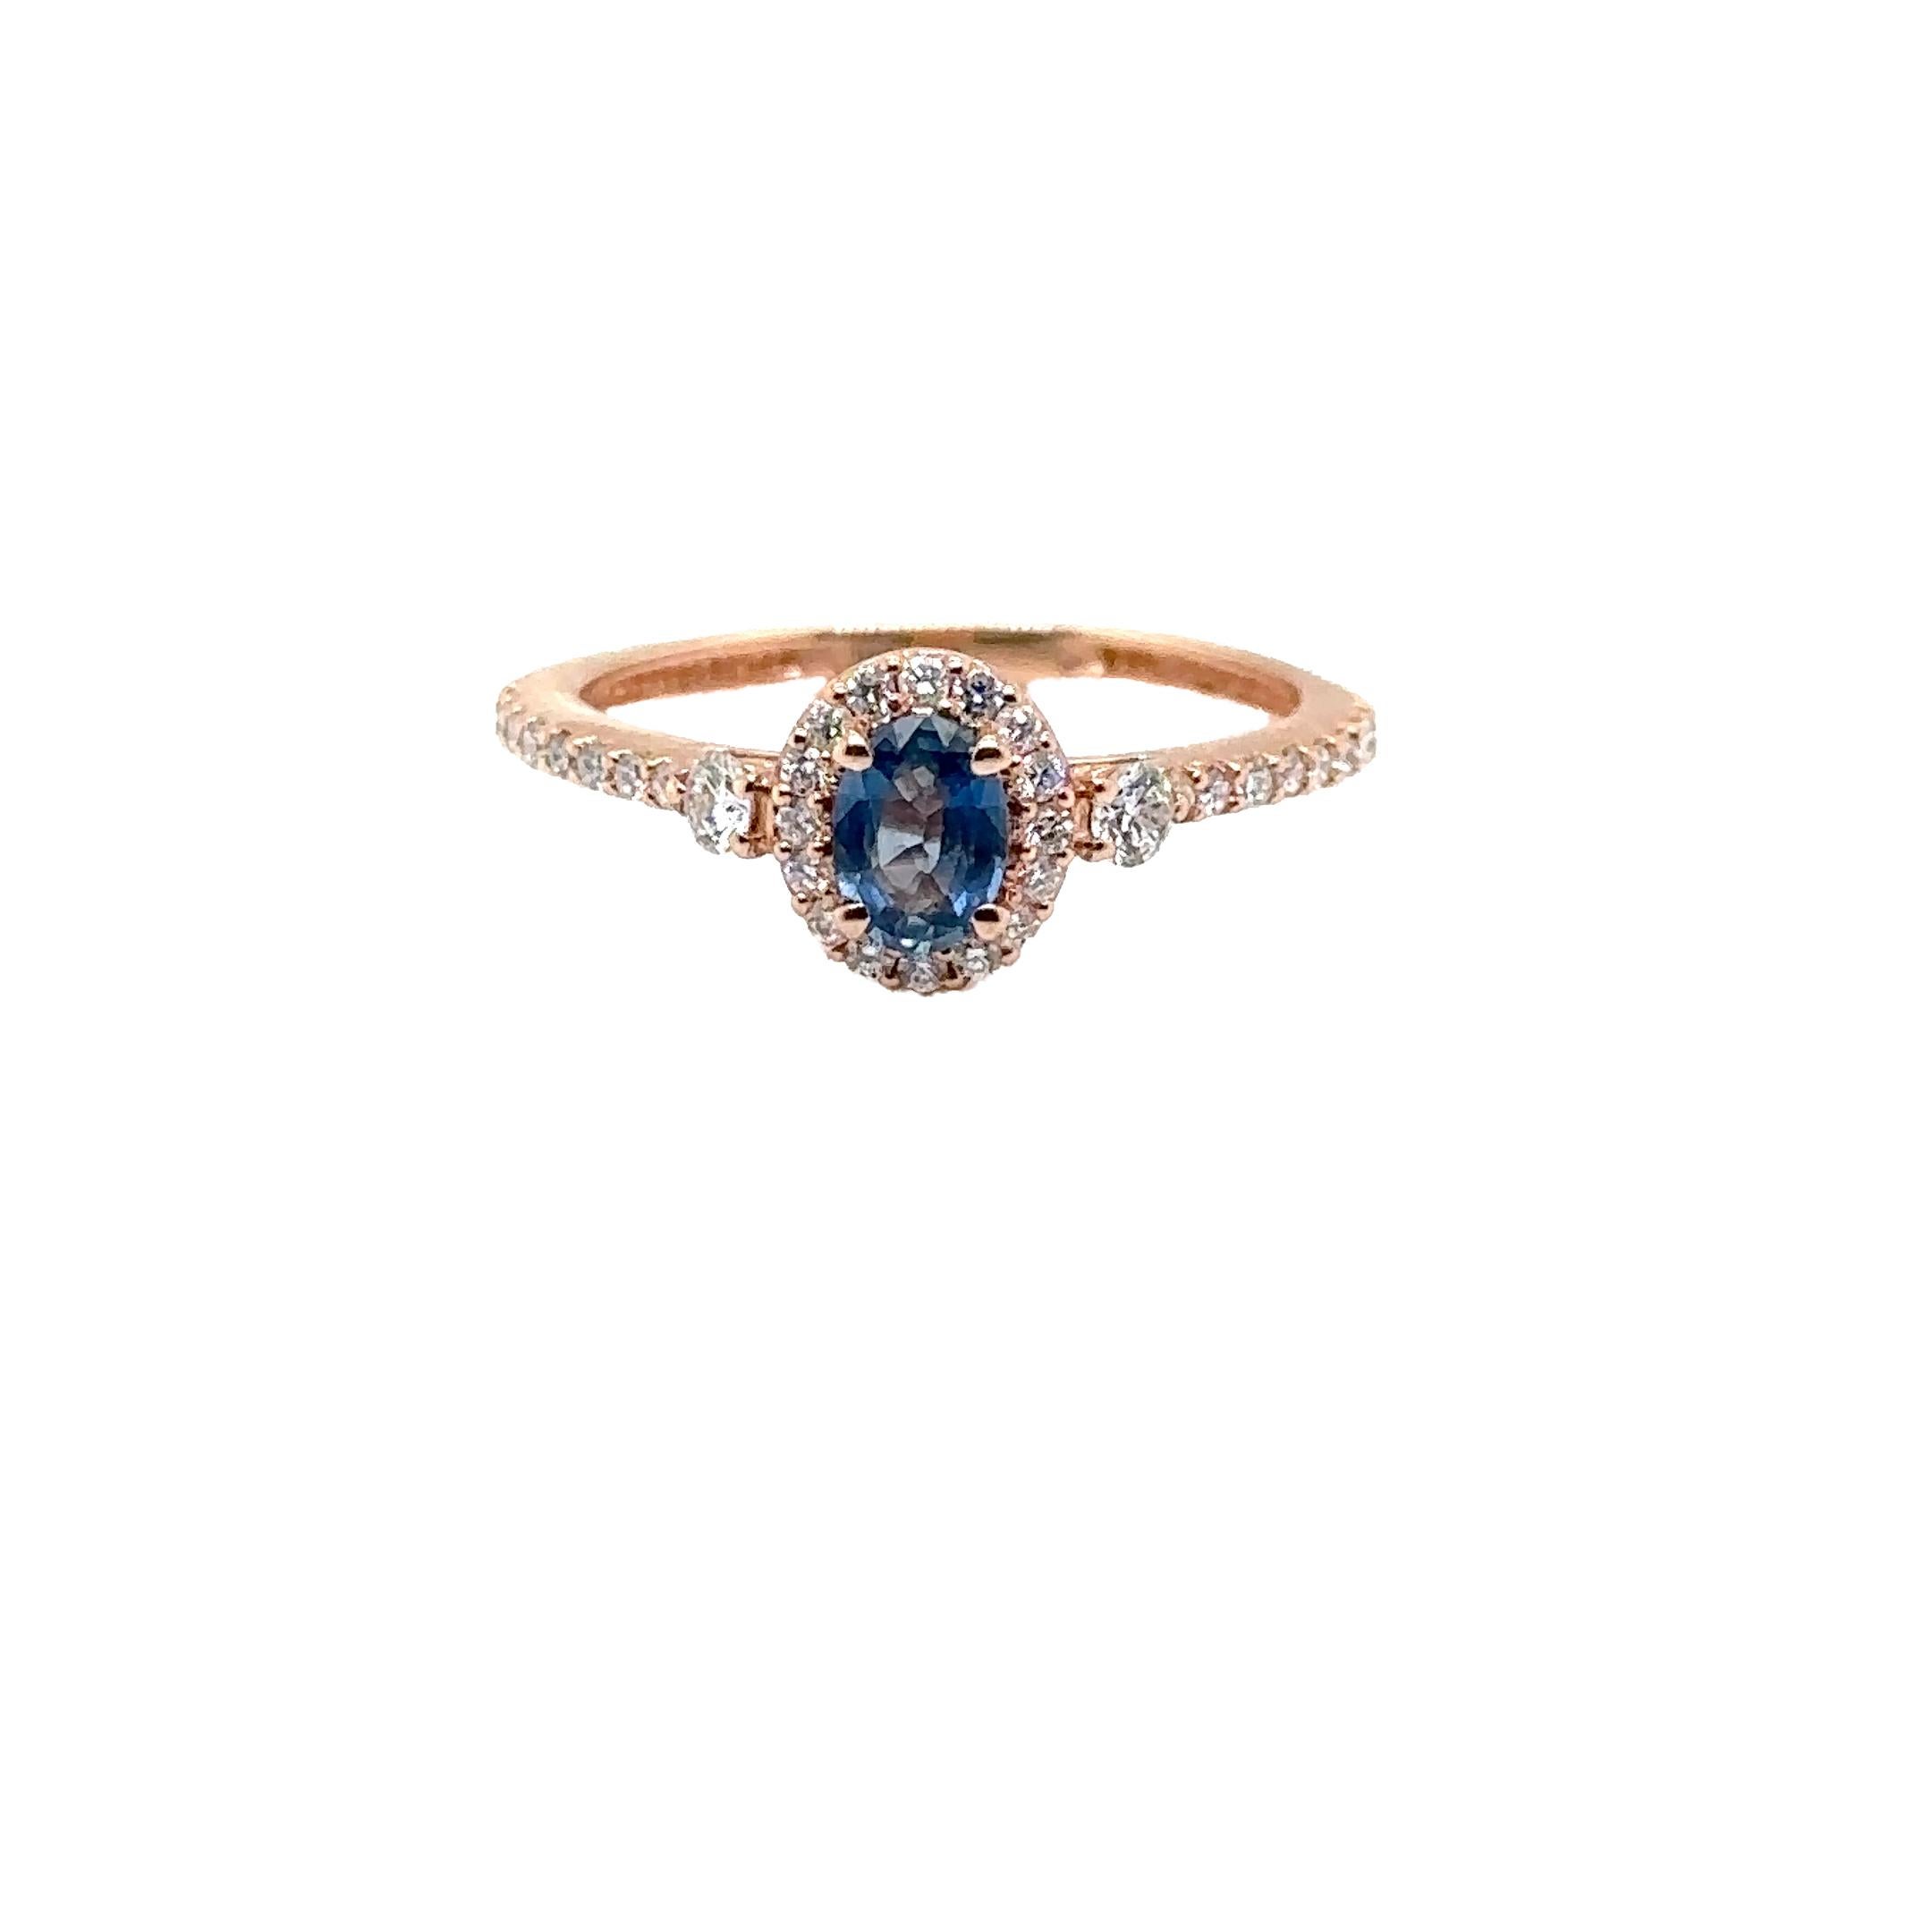 JAS-21-2238 - 14K ROSE GOLD OVAL SAPPHIRE RING with DIAMONDS For Sale 1